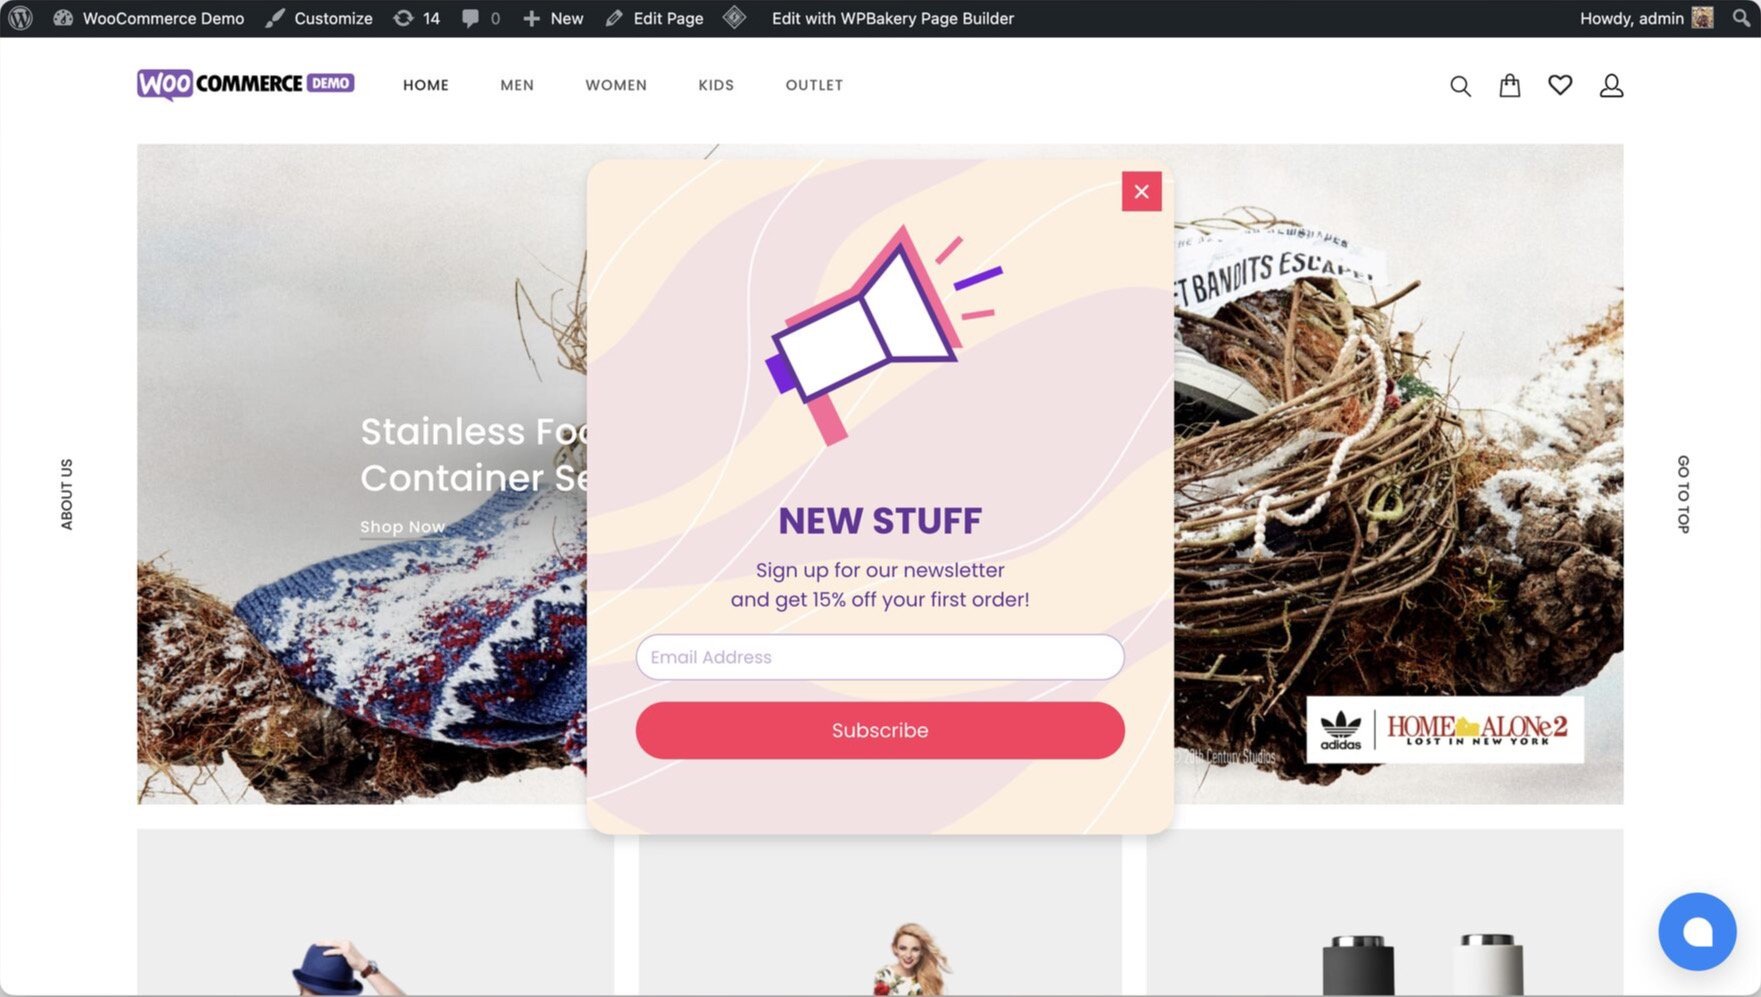 a Wordpress website with a popup showing a megaphone and "New Stuff" head text in pink theme